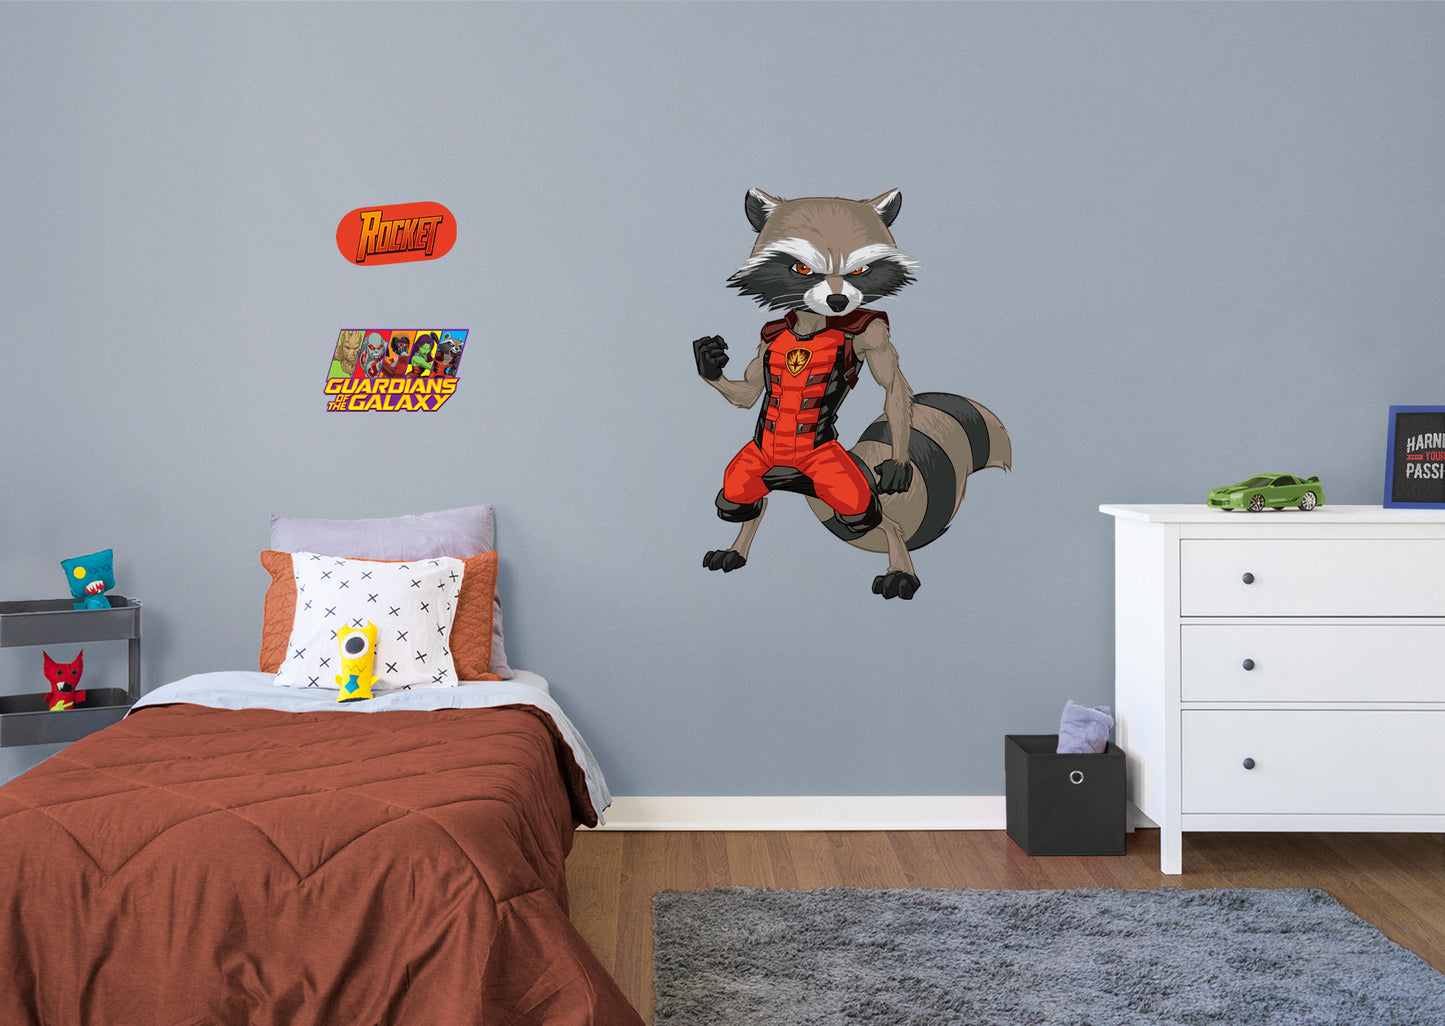 Guardians of the Galaxy Rocket Racoon RealBig        - Officially Licensed Marvel Removable Wall   Adhesive Decal